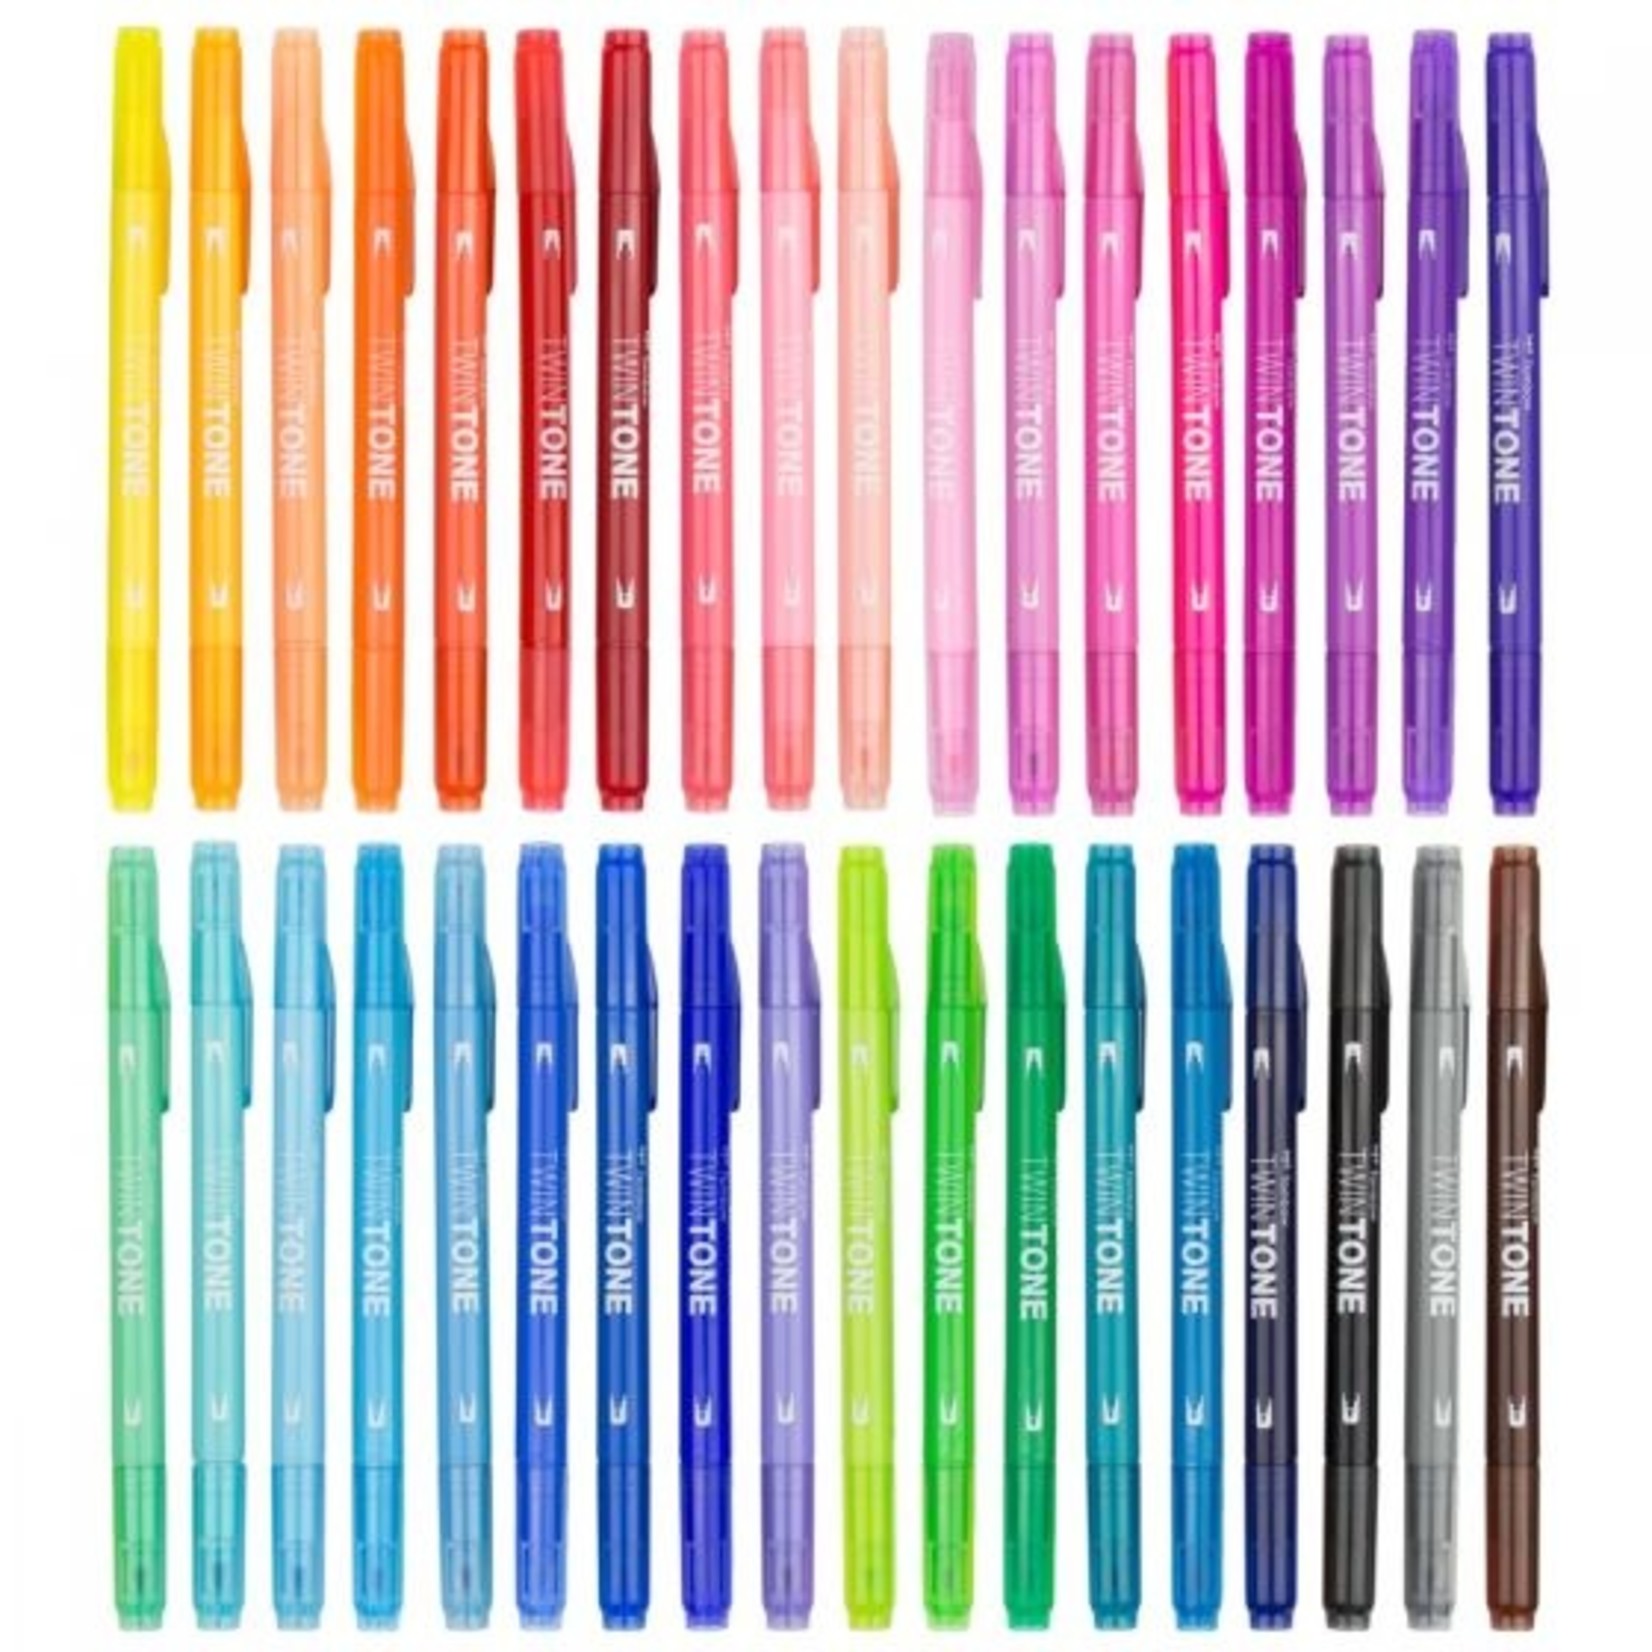 TOMBOW TWIN-TONE DUAL-TIP MARKER 17 PRUSSIAN BLUE